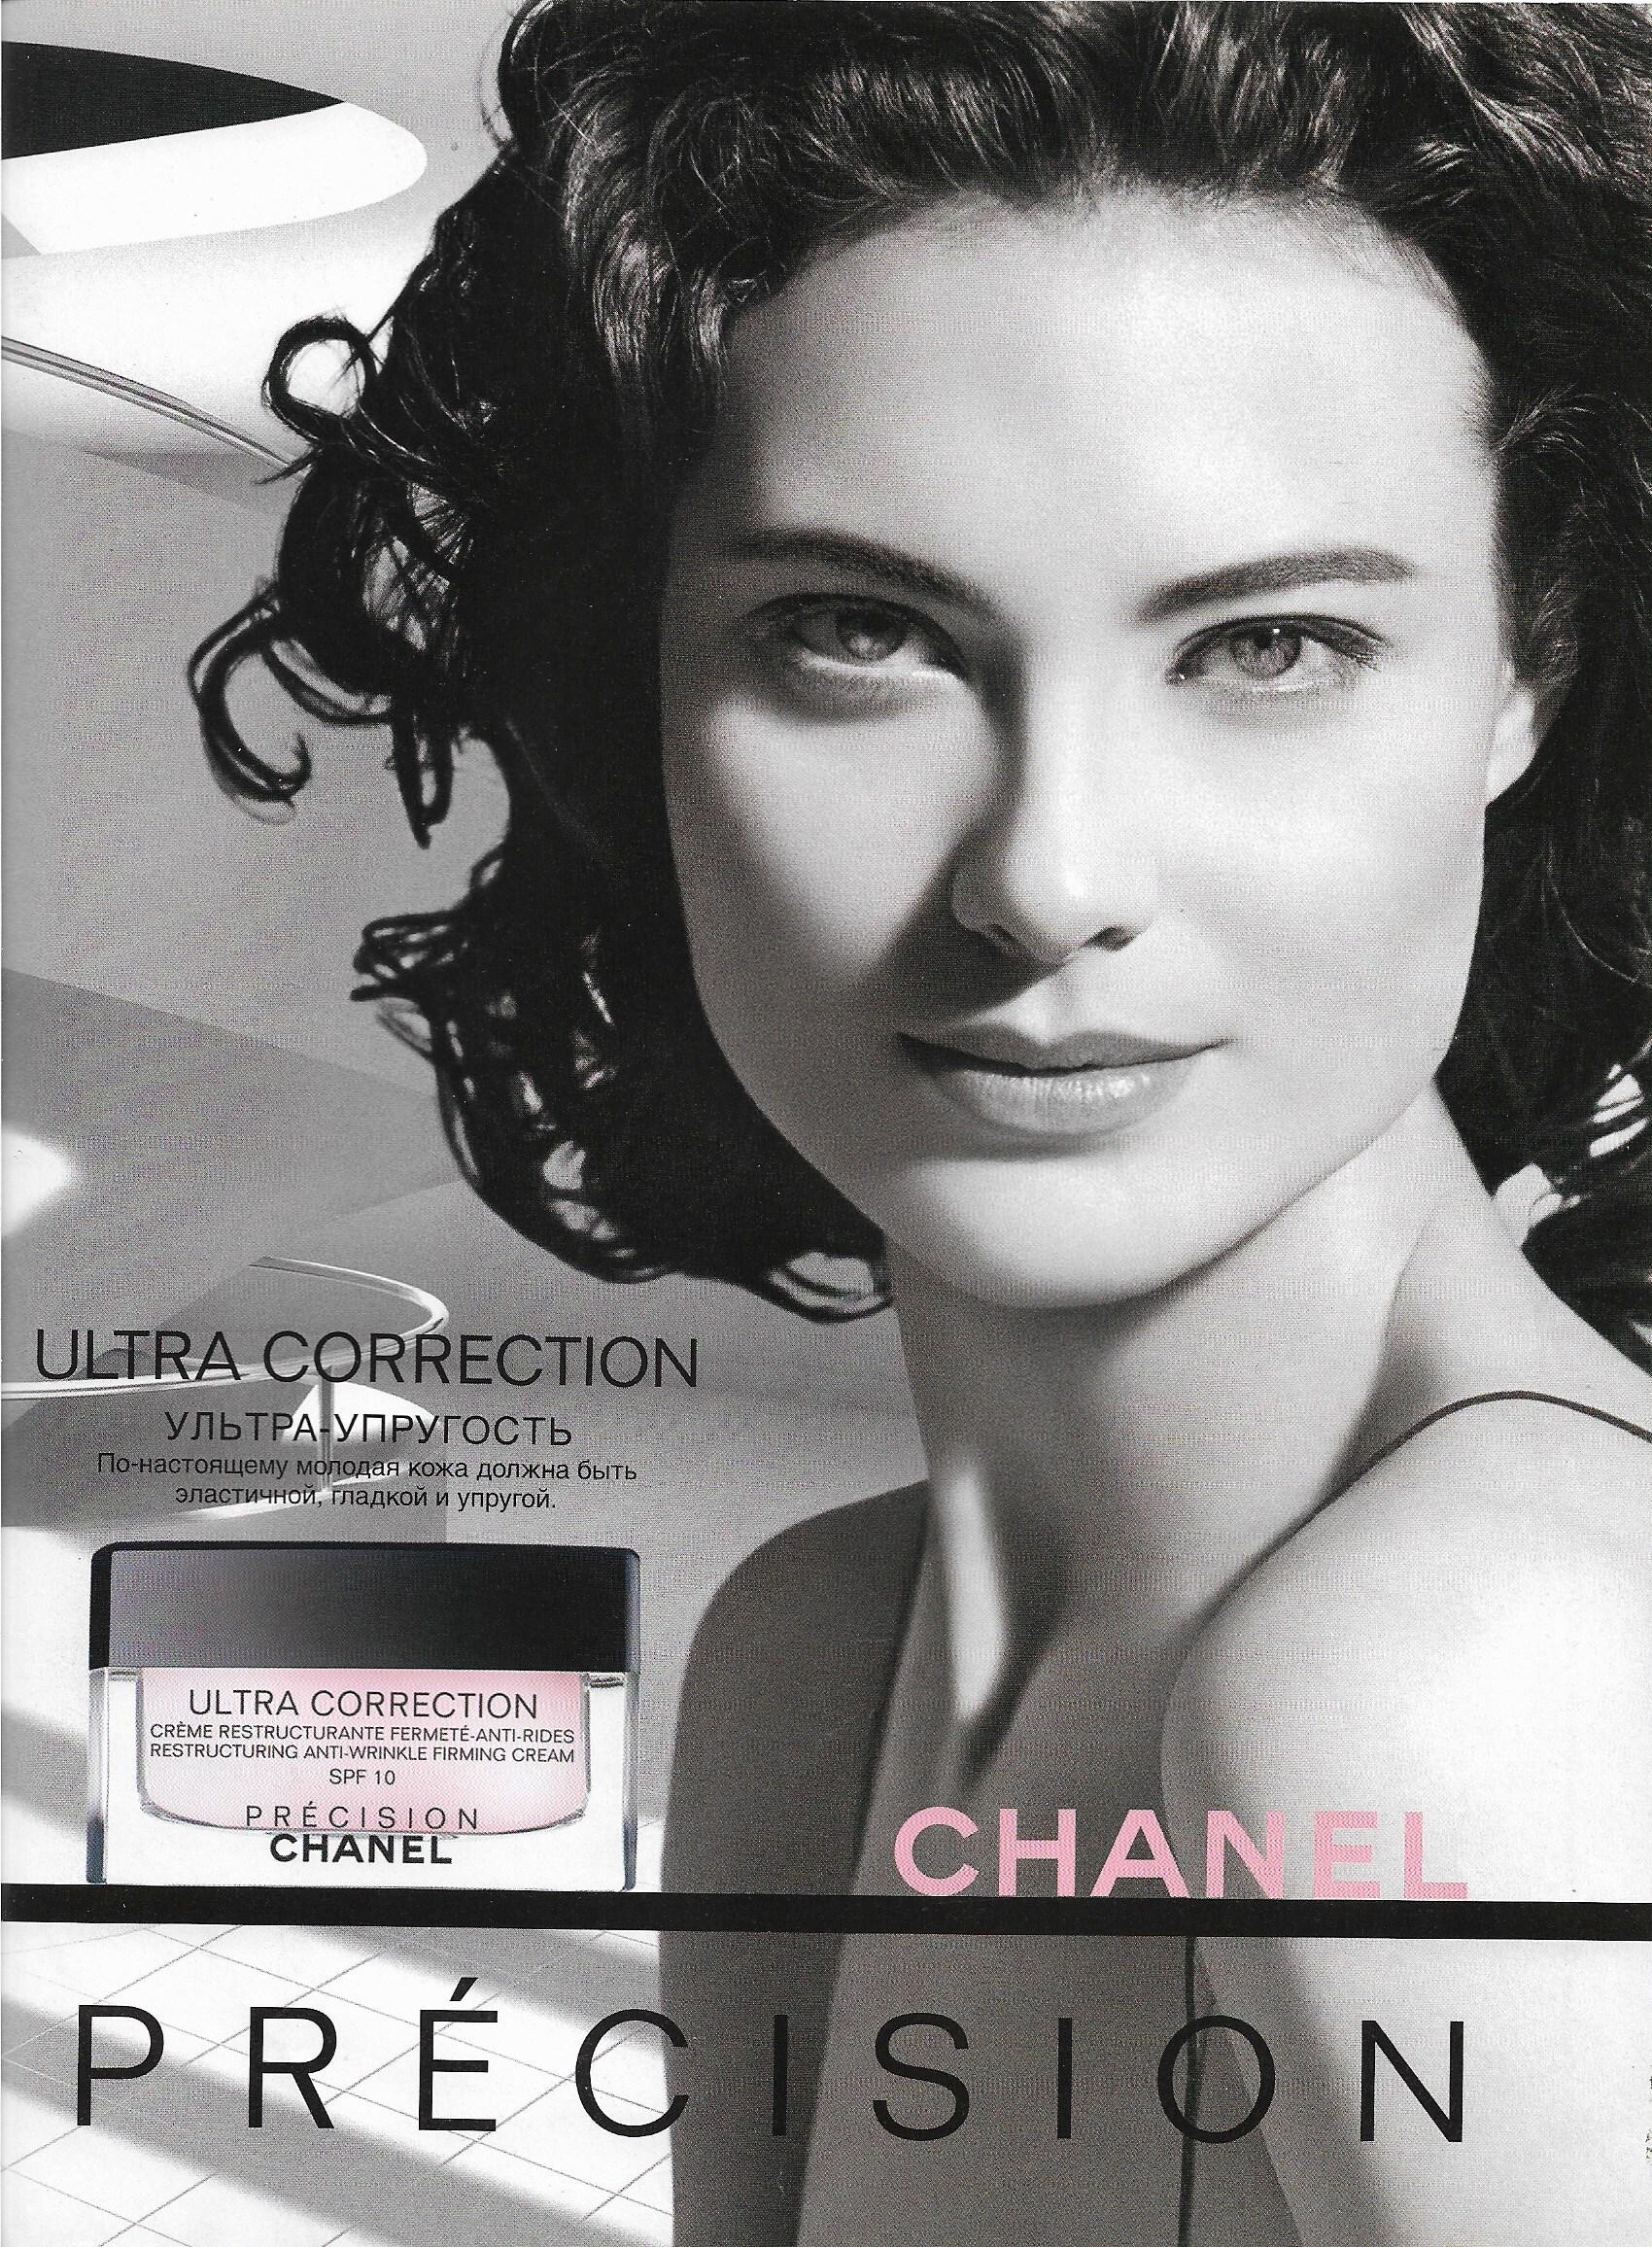 CHANEL Ads - Page 51 - General Discussion - Bellazon